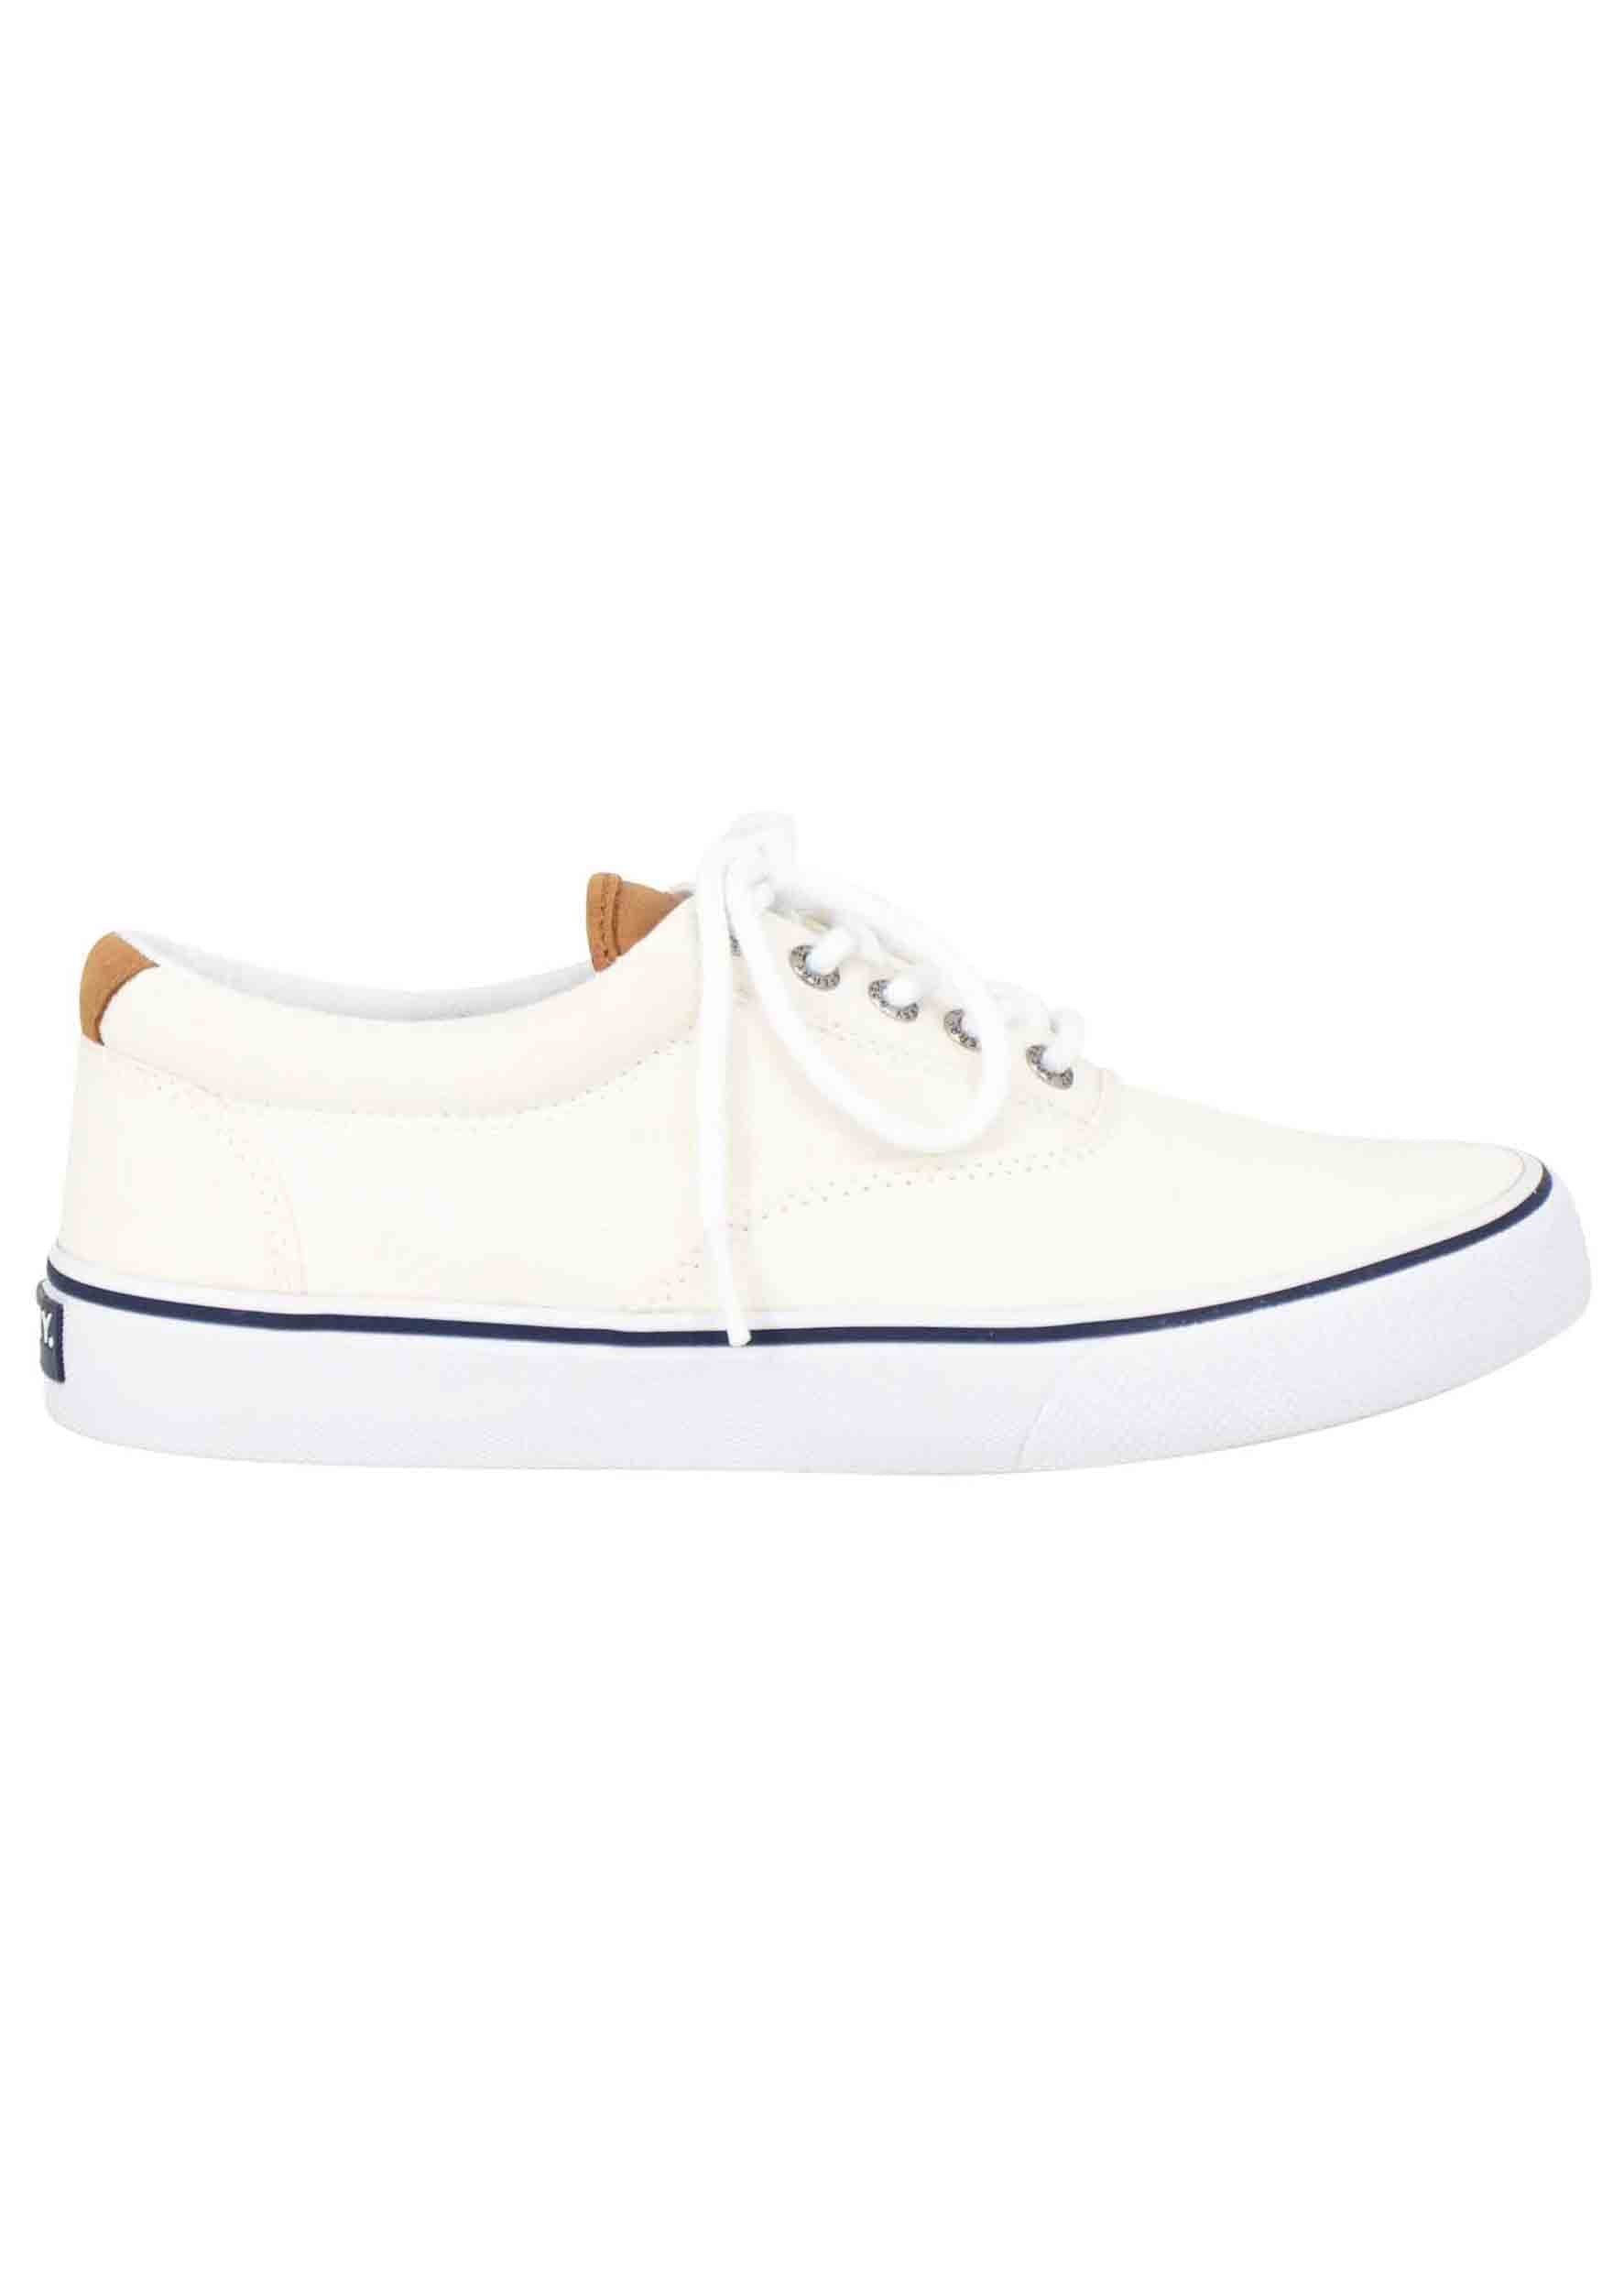 Sneakers uomo Top Sider in canvas bianco